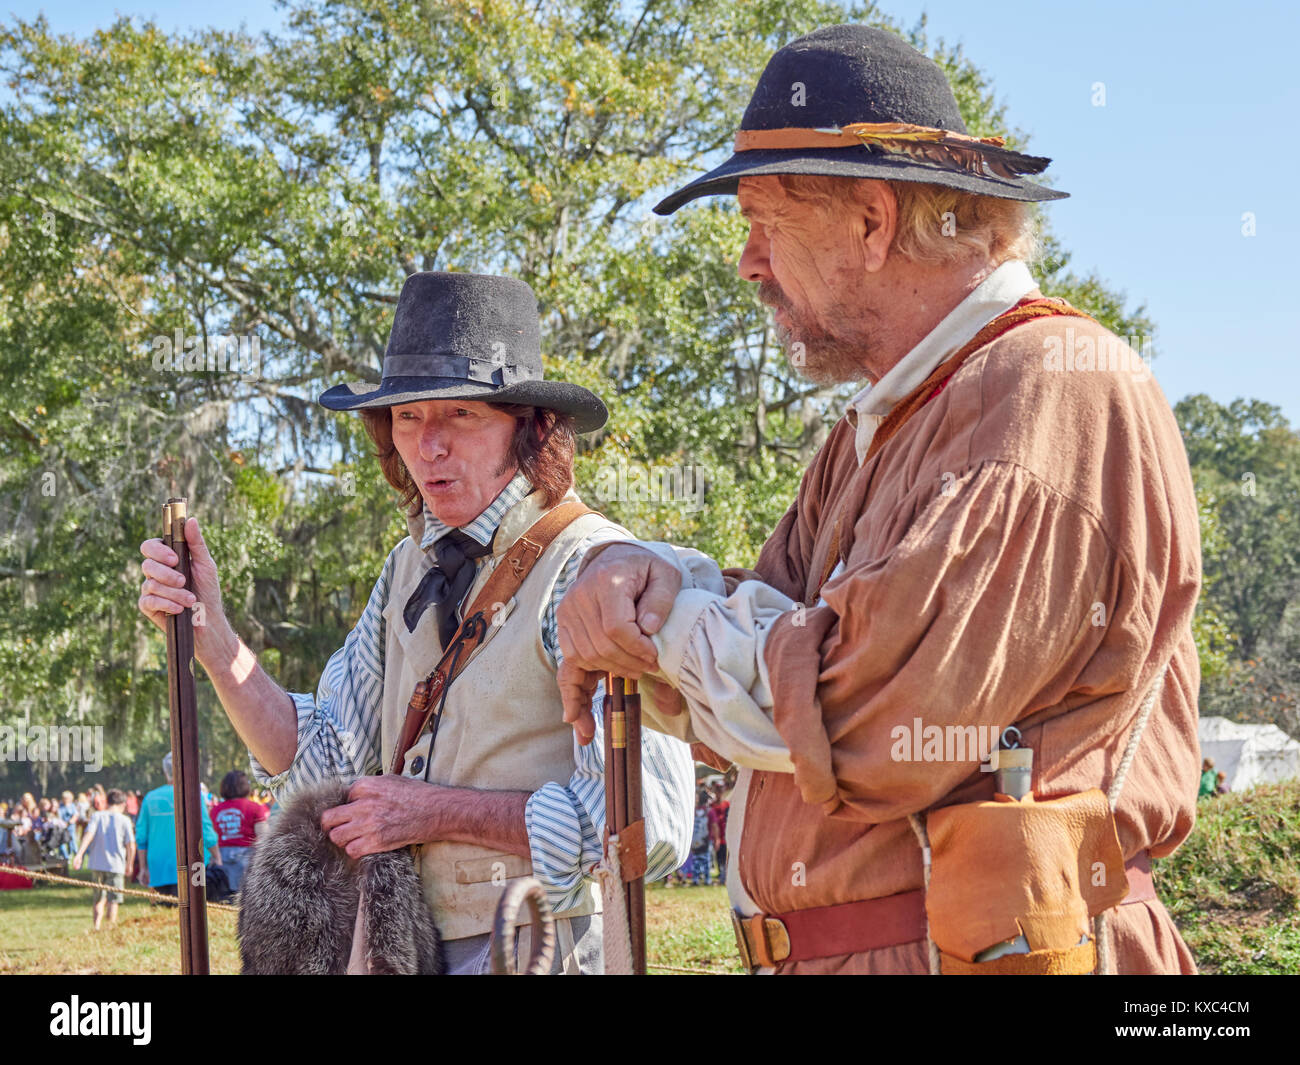 Historian and history reenactor or actor, Al Bouler, portrays Davy Chrockett during Old Frontier Days in Wetumka Alabama, United States. Stock Photo